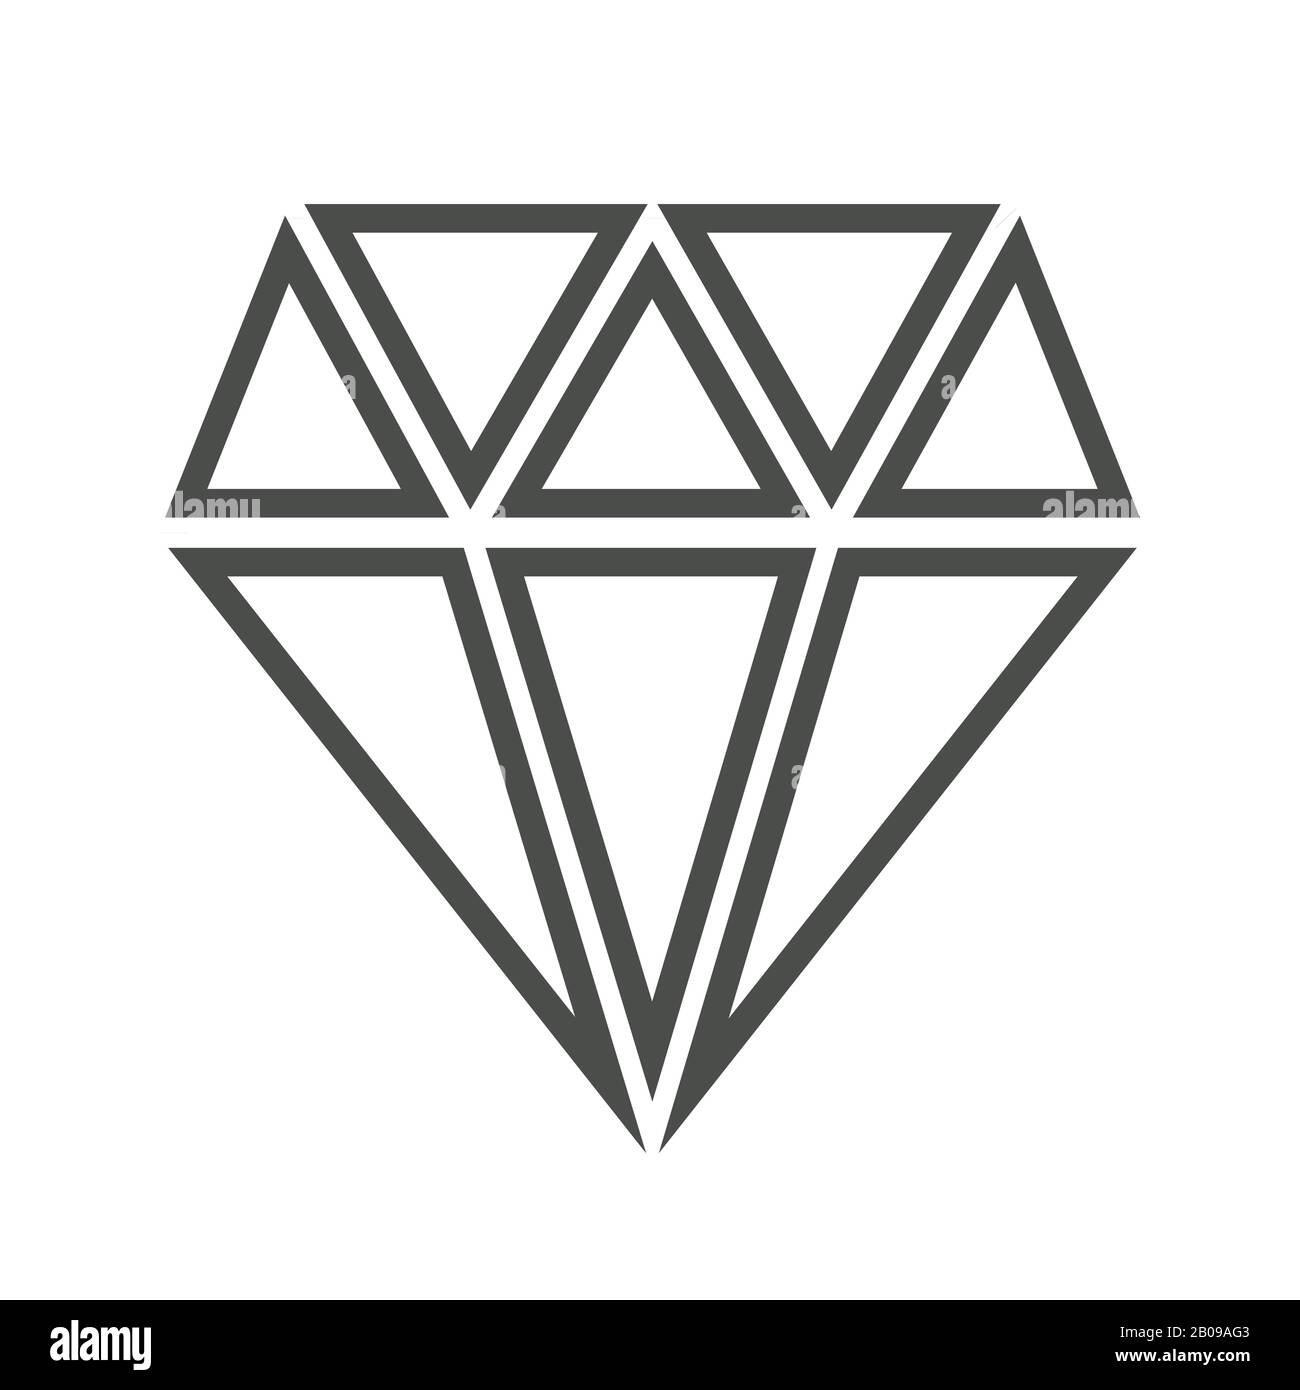 Diamond vector icon isolated over white. Object of precious linear stone illustration Stock Vector